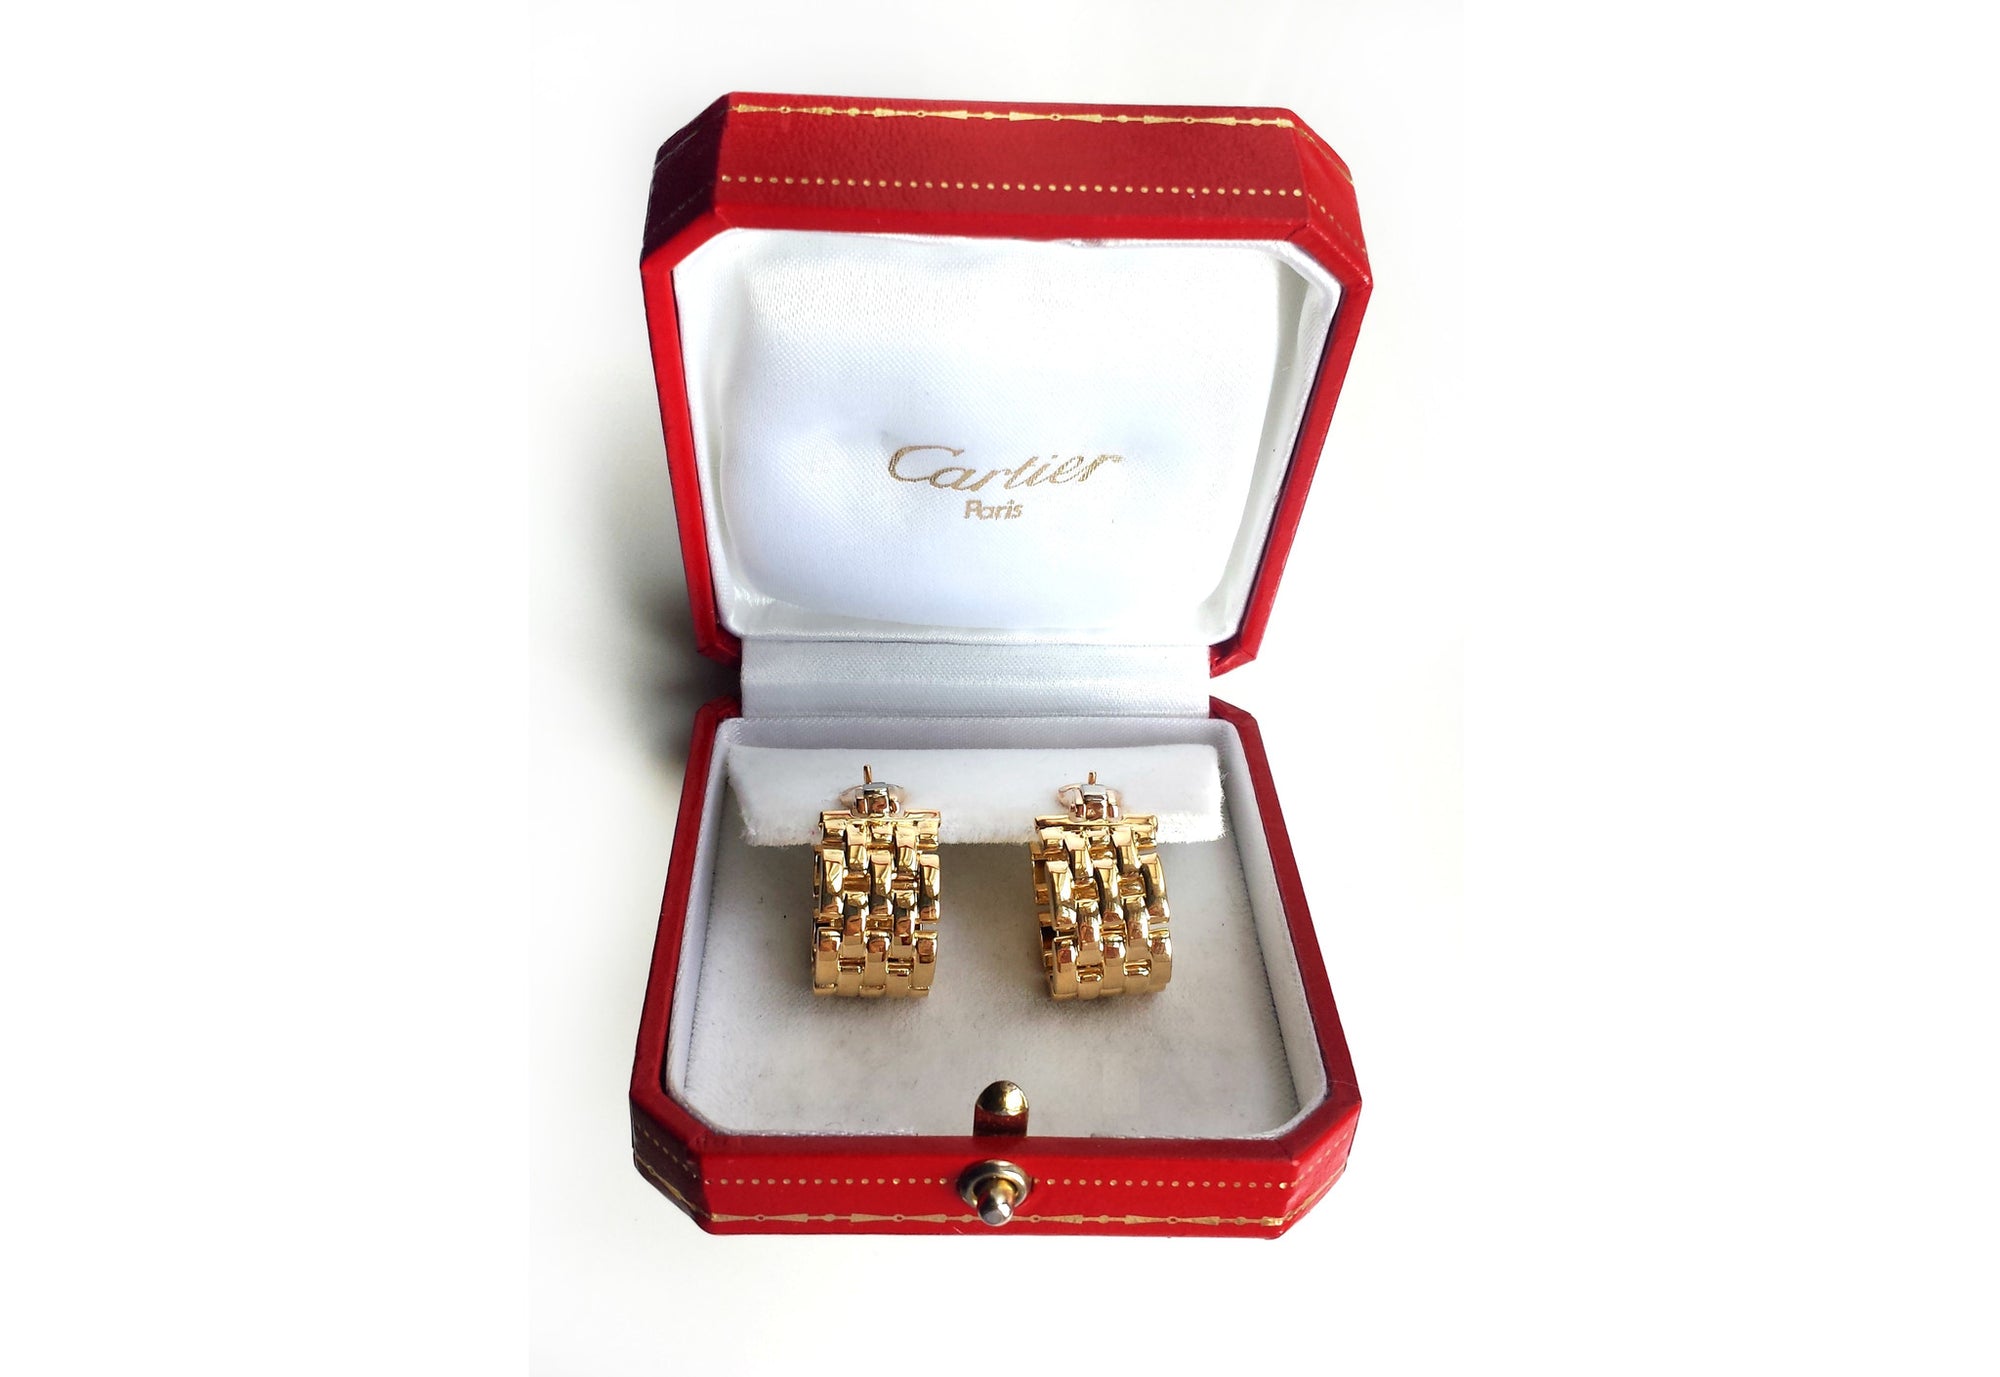 Classic Cartier 1990s 5 Row Maillon Panthere 18k Gold Earrings Pierced Box